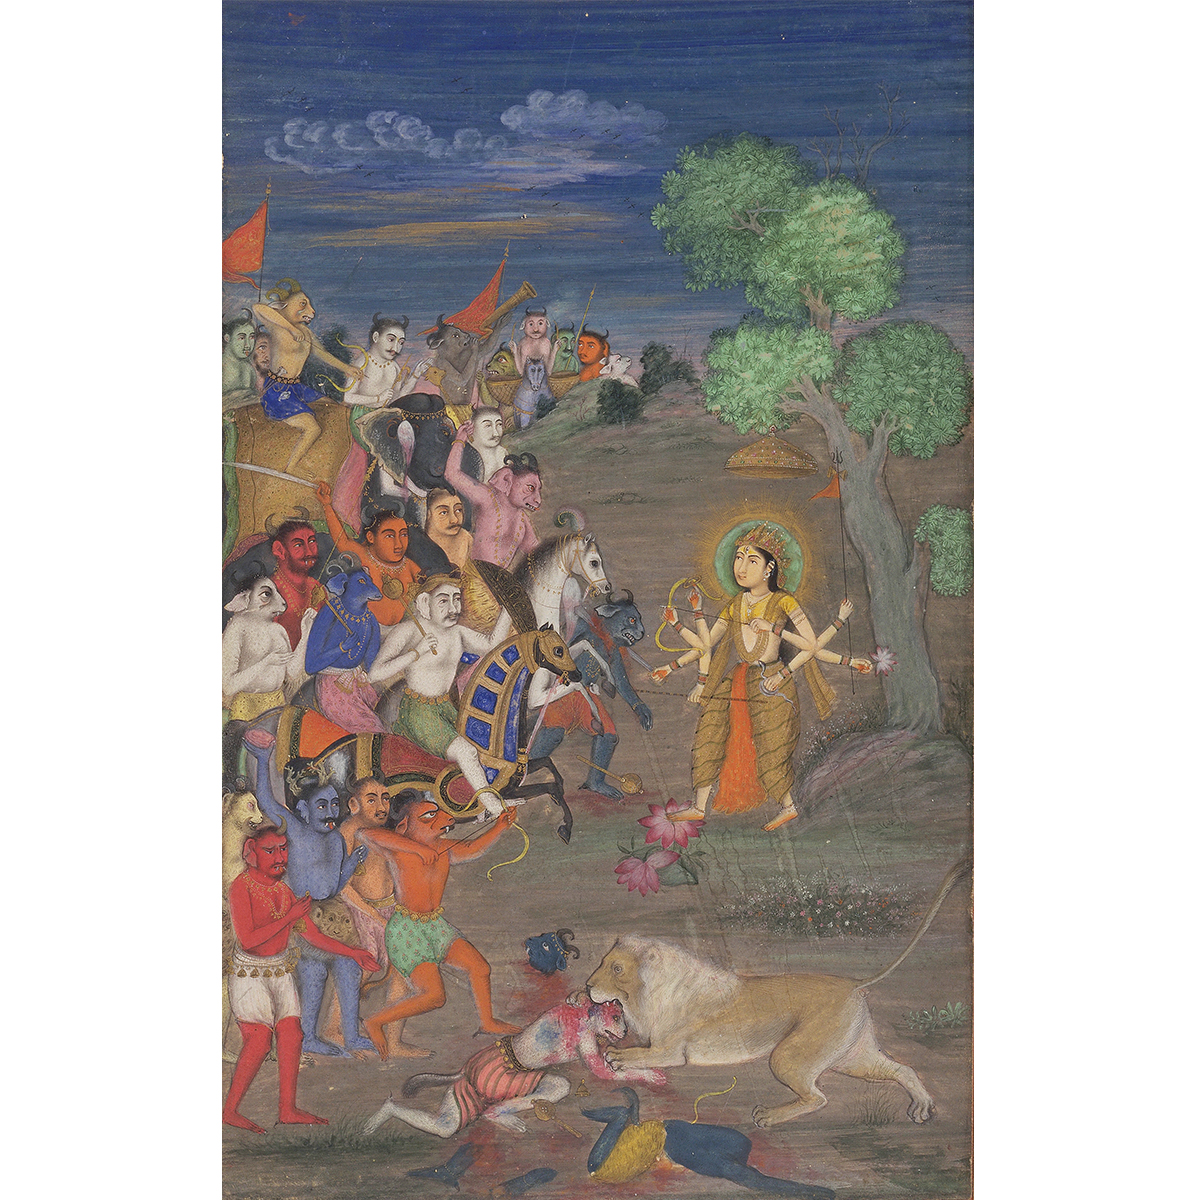 painting of a goddess fighting demons riding horses